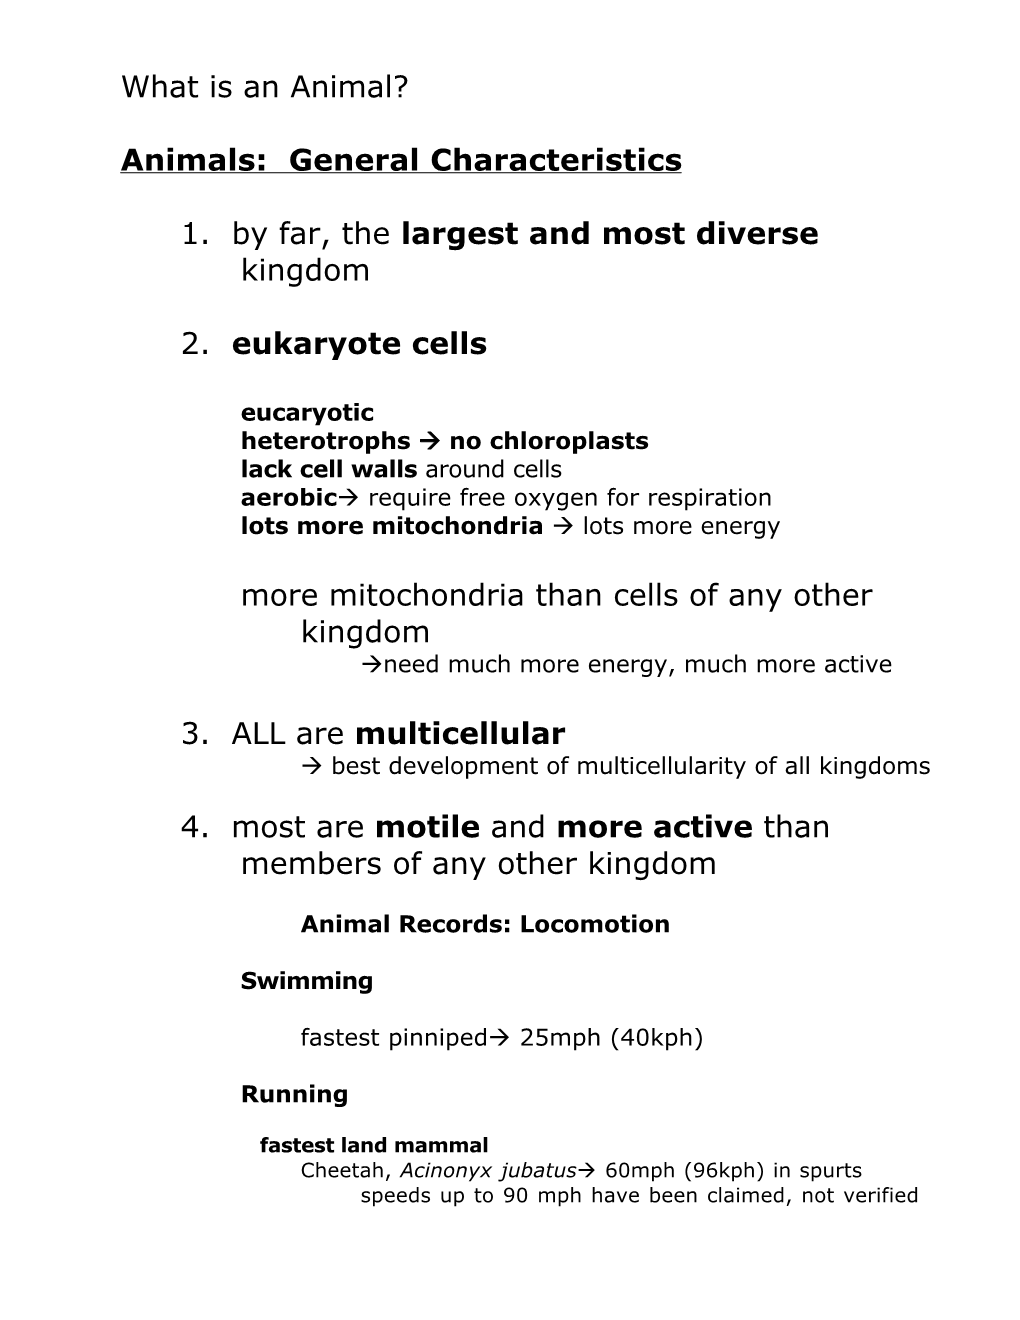 What Is an Animal? Animals: General Characteristics 1. by Far, the Largest